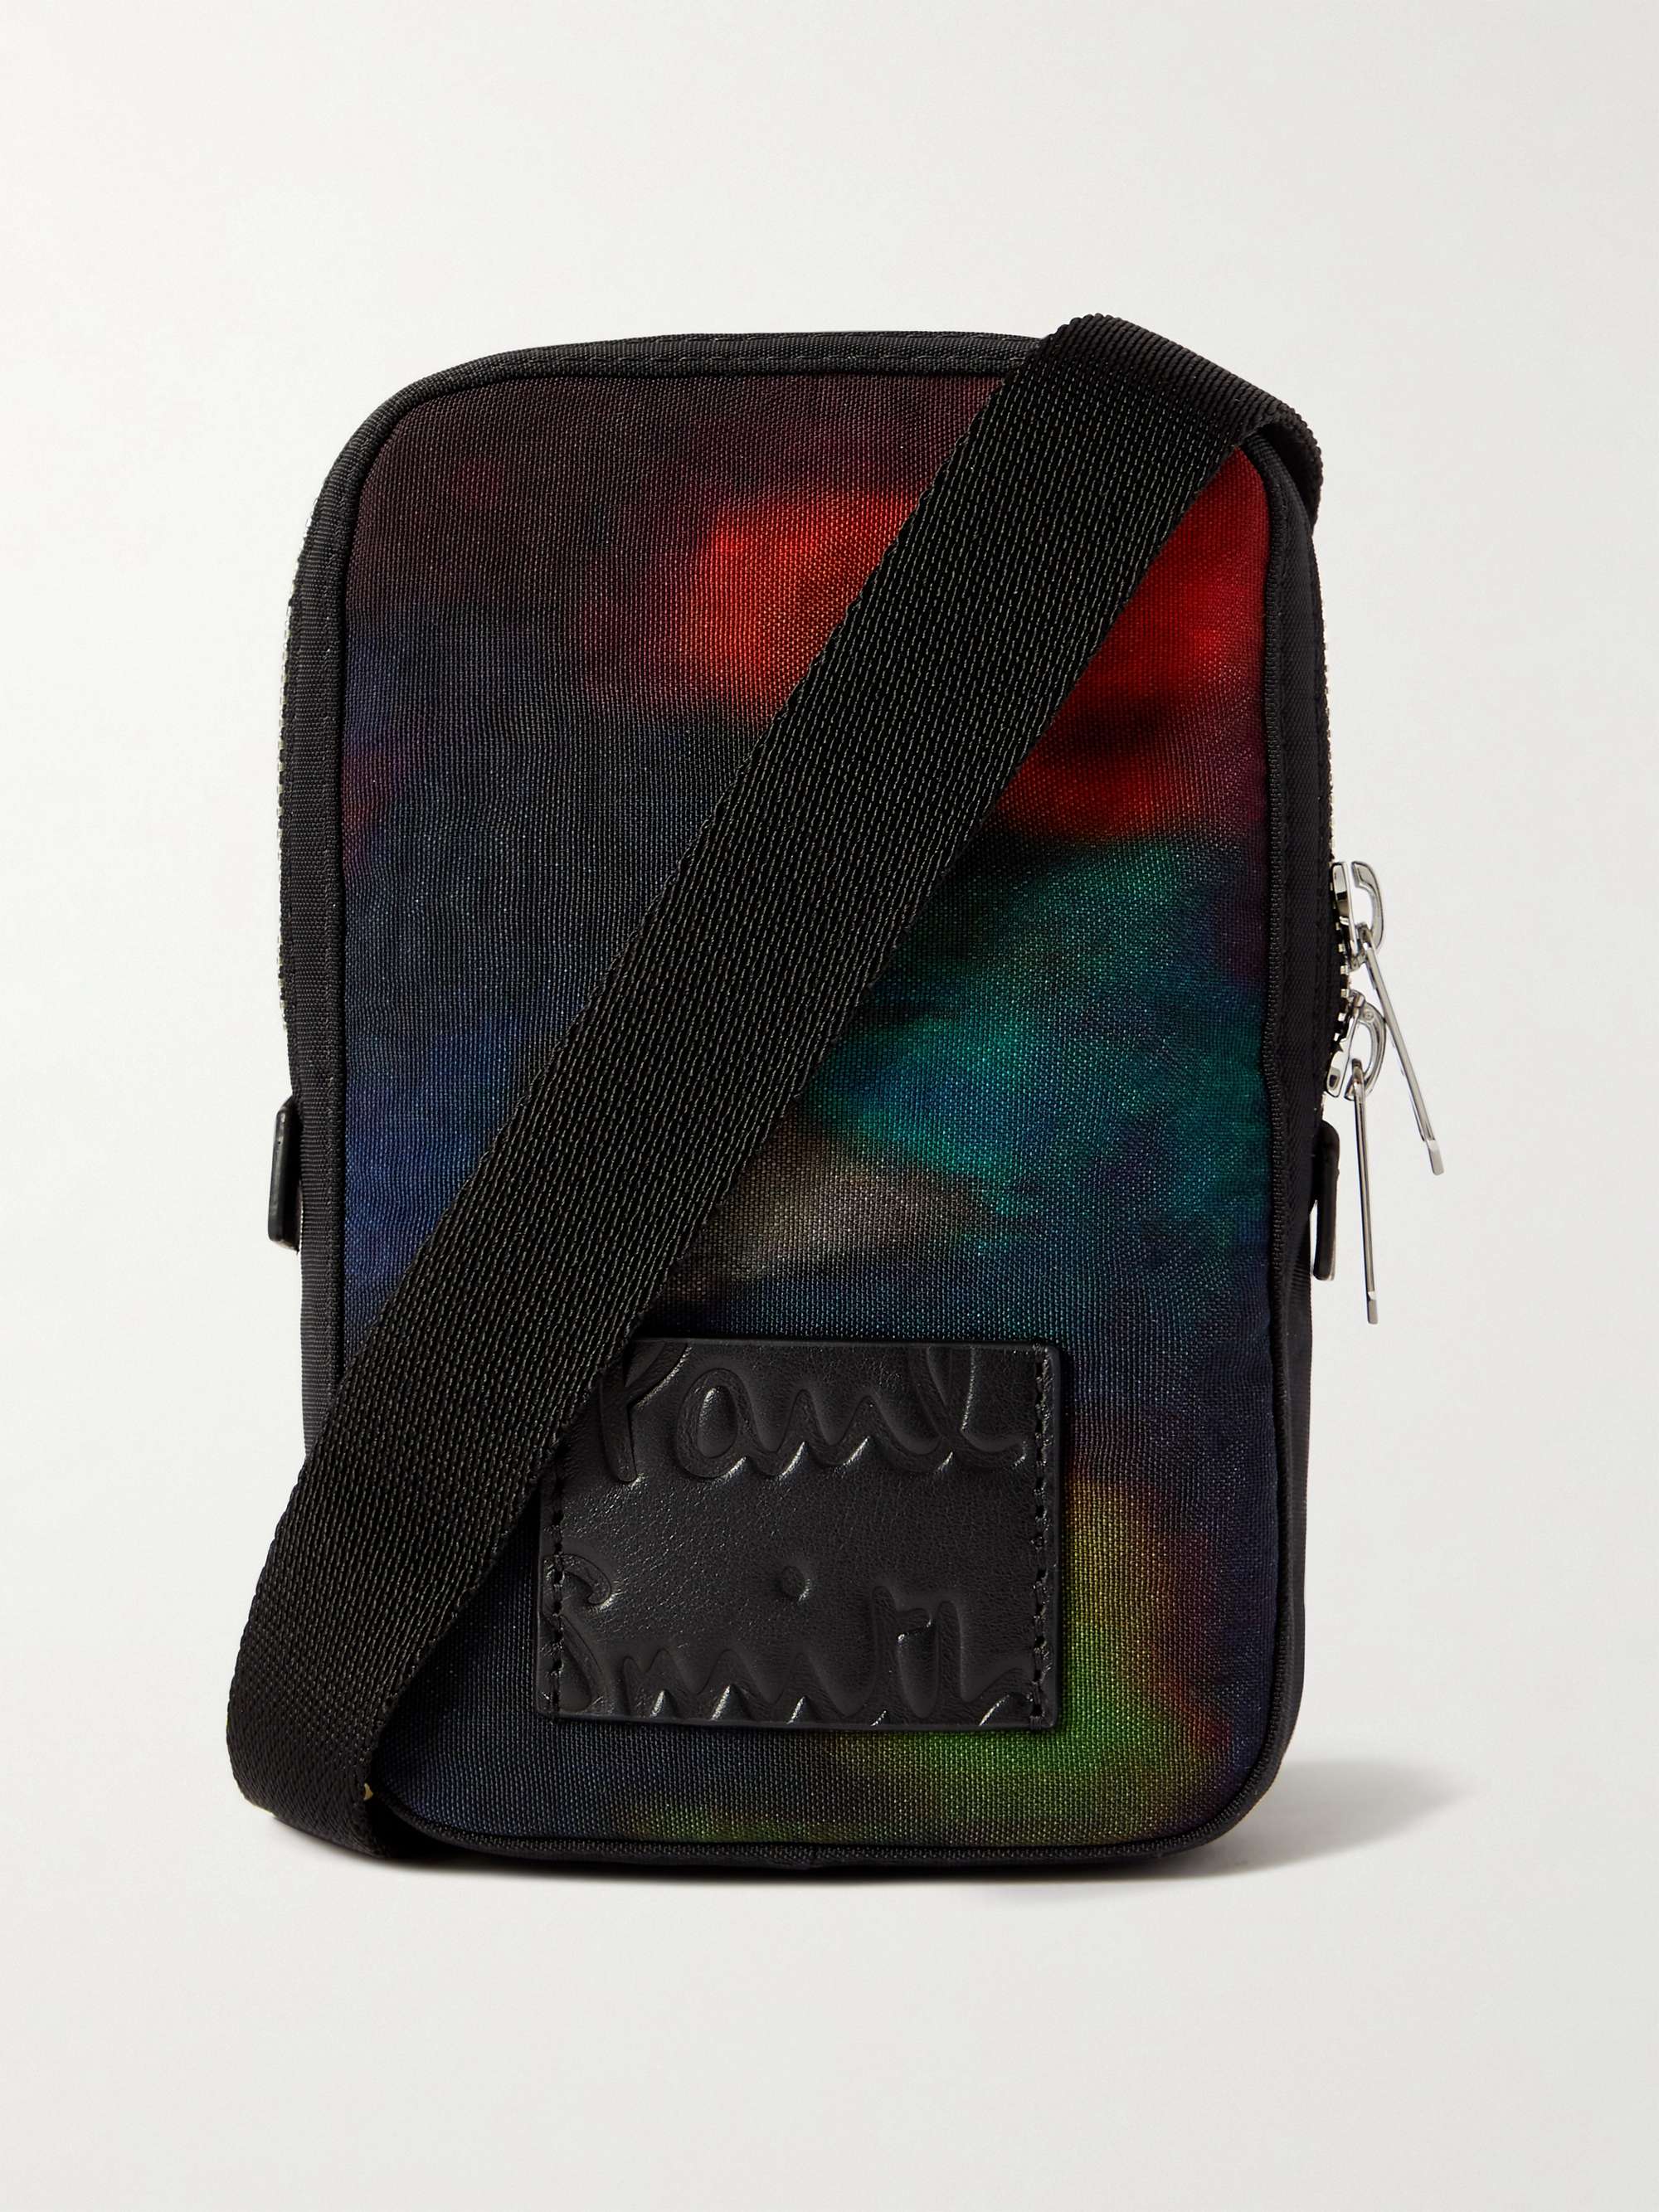 PAUL SMITH Ink Spill Leather-Trimmed Printed Canvas Pouch